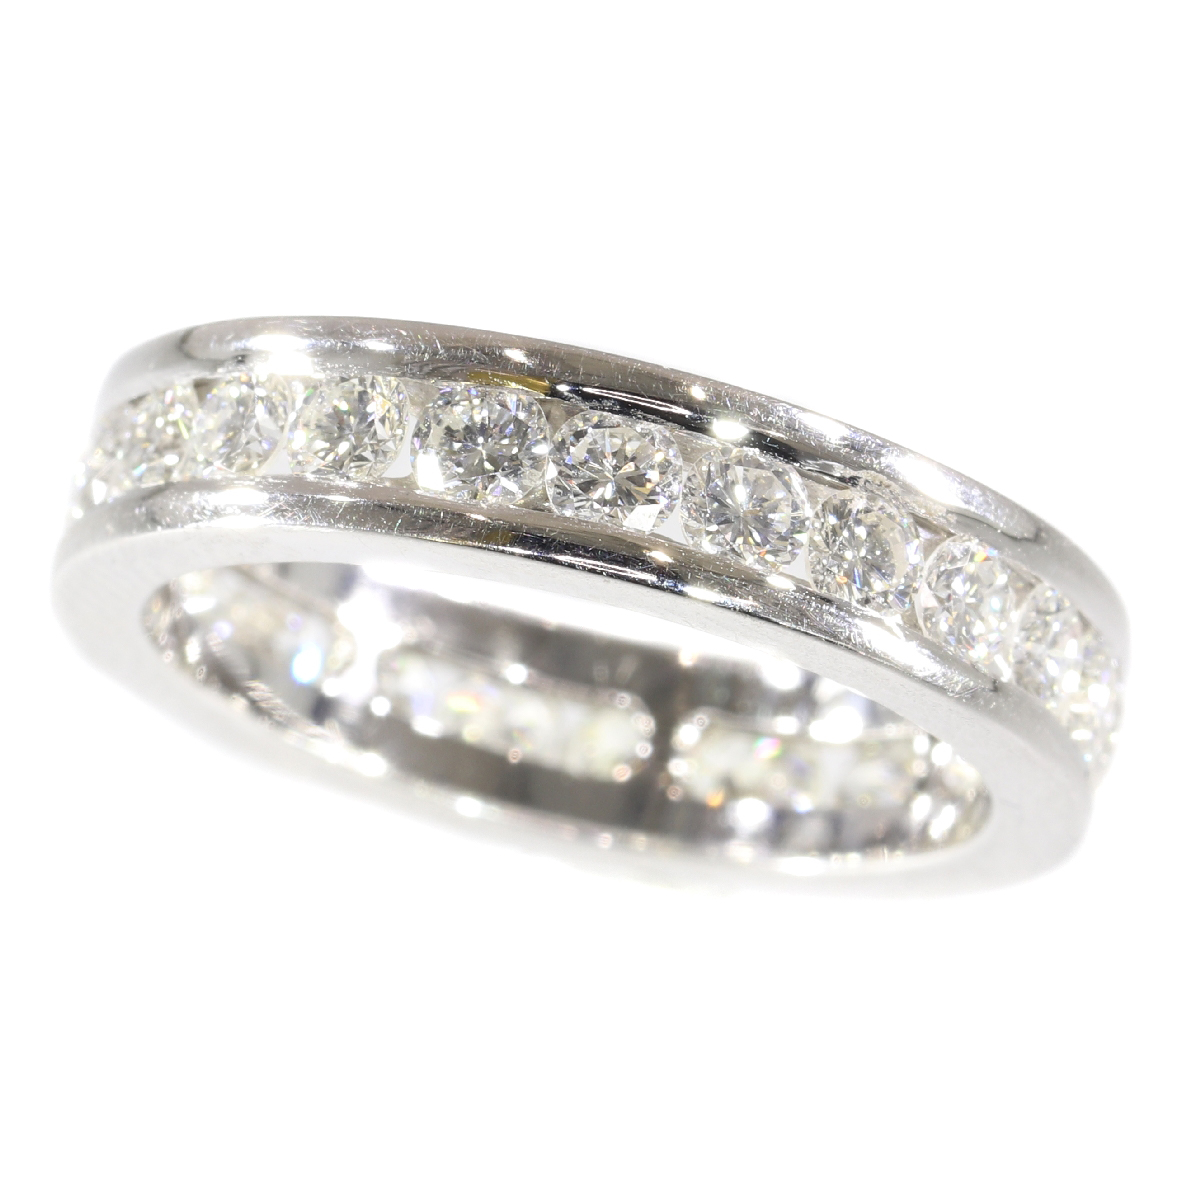 White gold estate eternity band or a so-called alliance ring set with brilliants